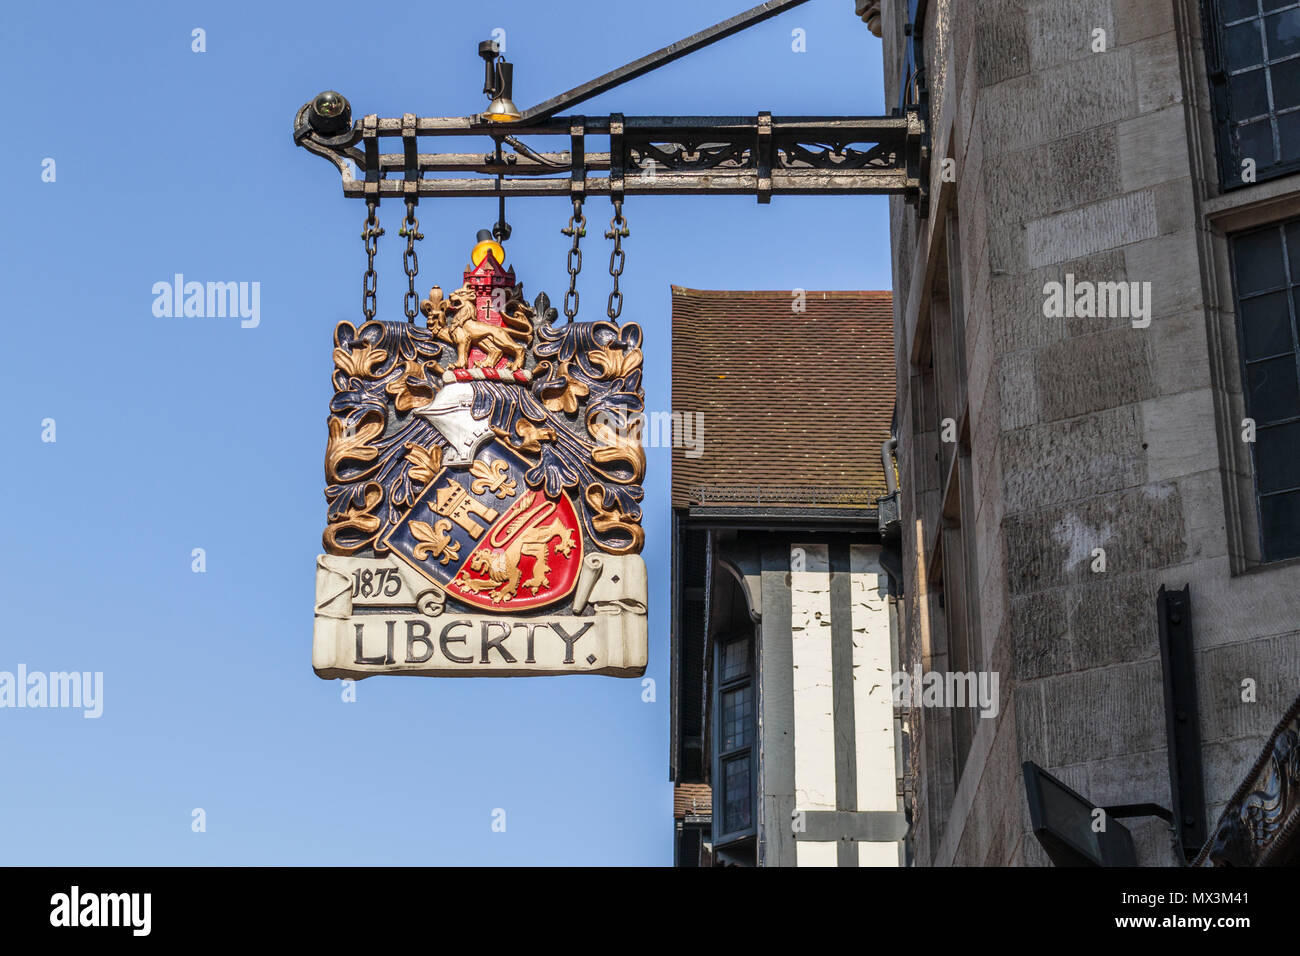 Coat of arms of Liberty, the famous up market luxury department store in Great Marlborough Street in the West End shopping district of London W1, UK Stock Photo